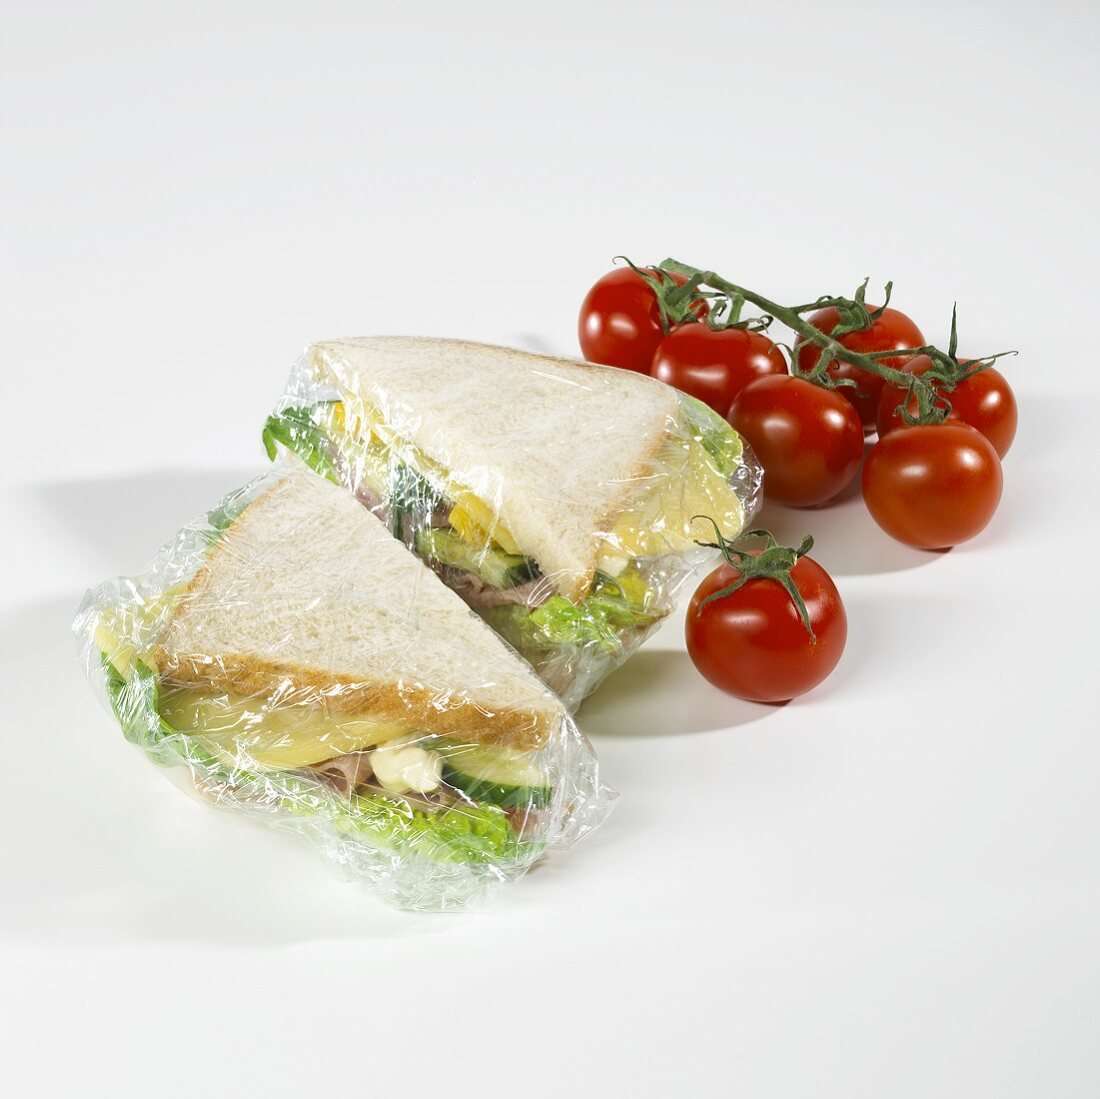 Sandwiches in clingfilm, tomatoes beside them